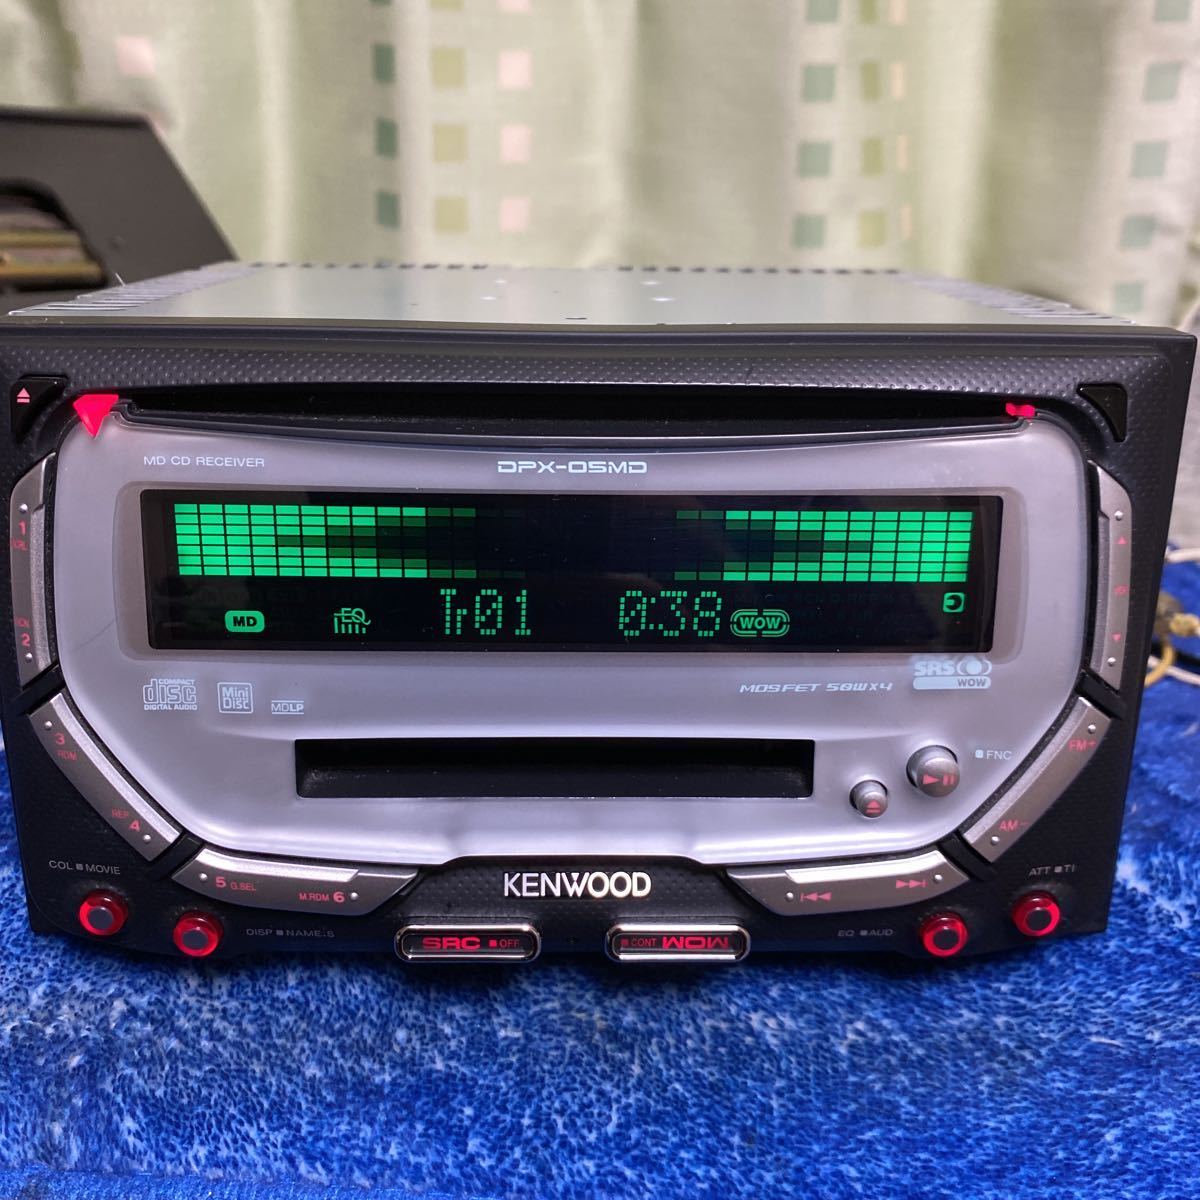 KENWOOD CD/MD плеер DPX-05MD